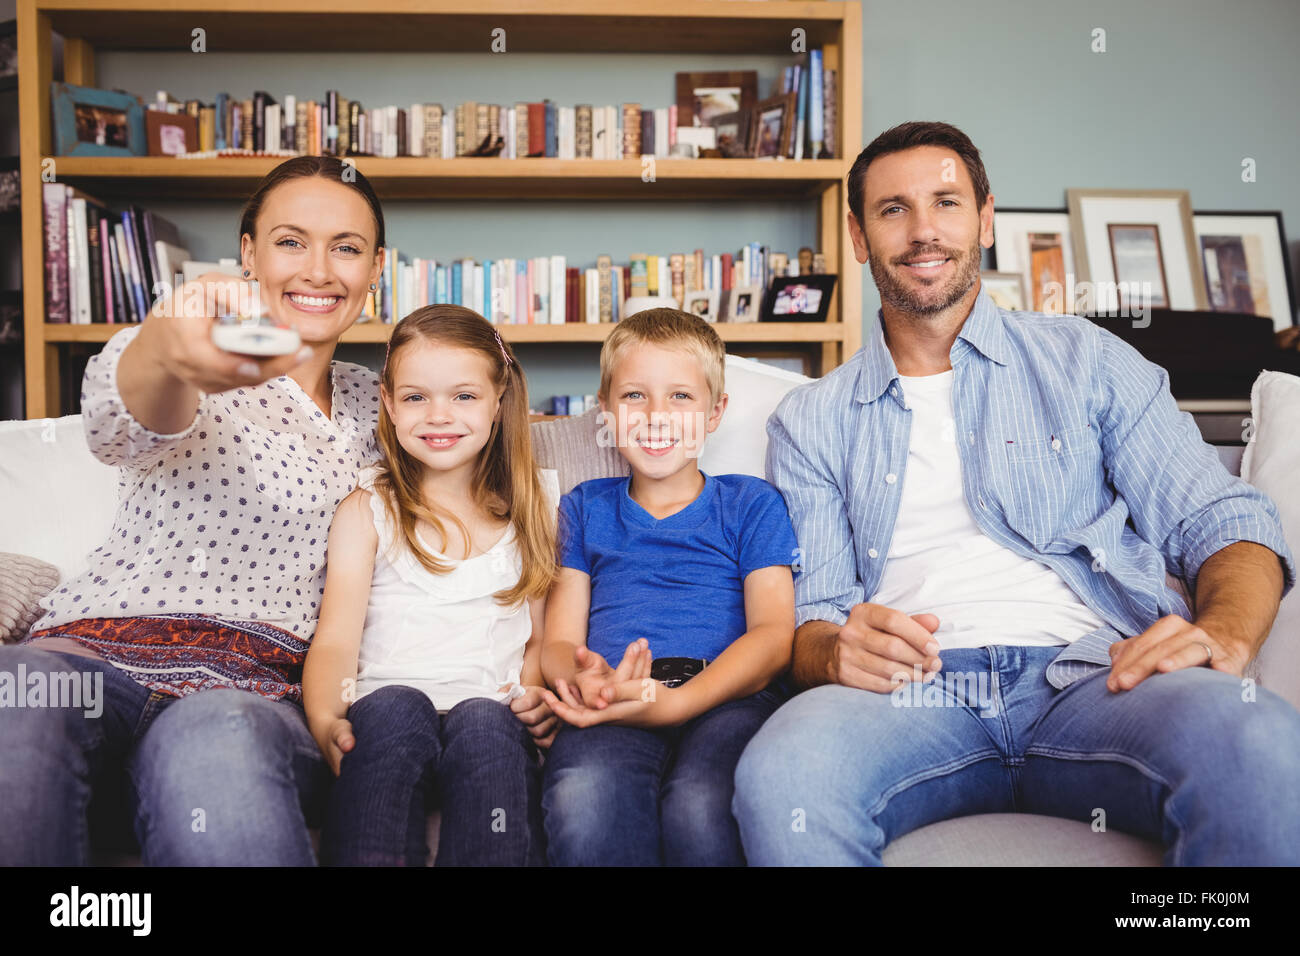 Smiling family watching television Stock Photo